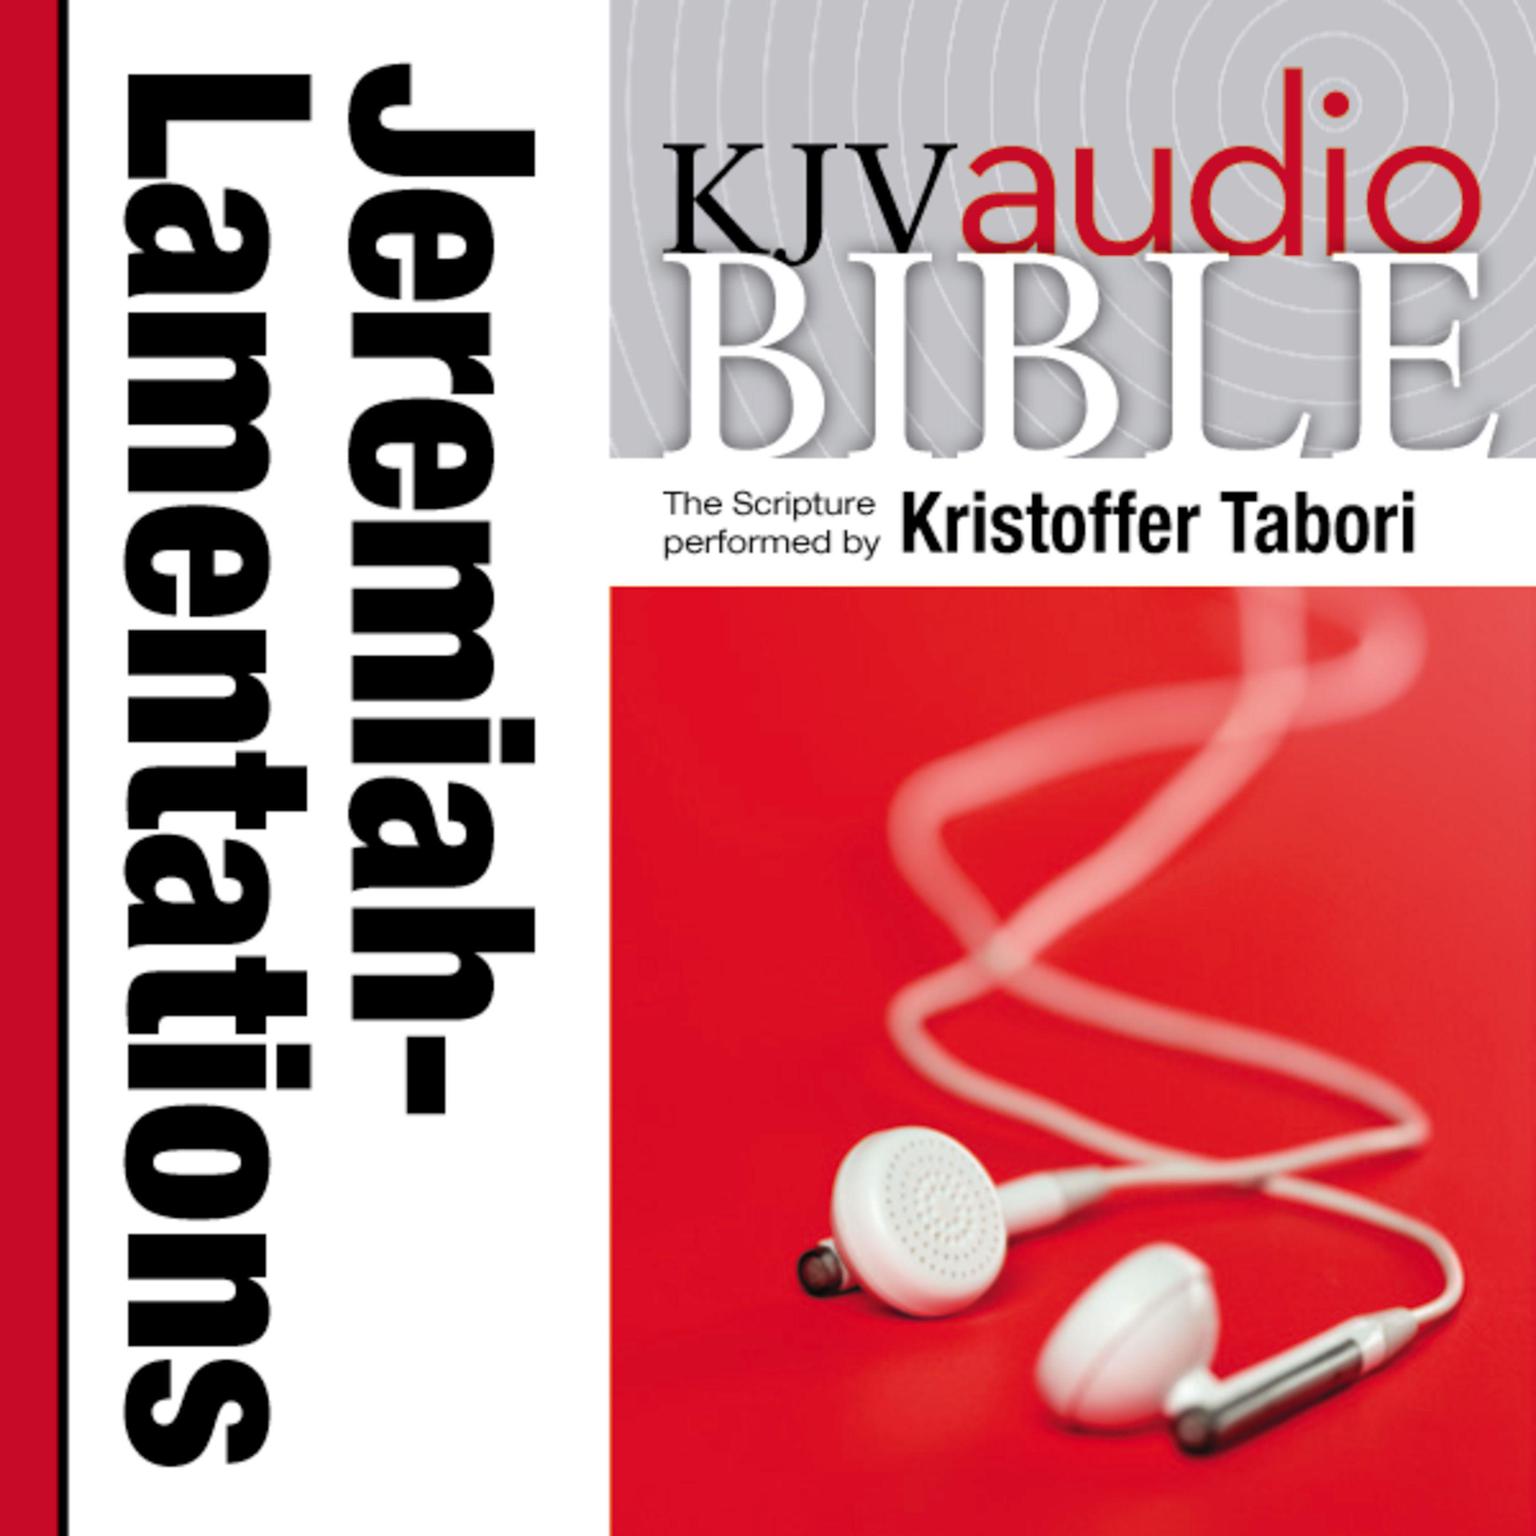 Pure Voice Audio Bible - King James Version, KJV: (20) Jeremiah and Lamentations: Holy Bible, King James Version Audiobook, by Thomas Nelson